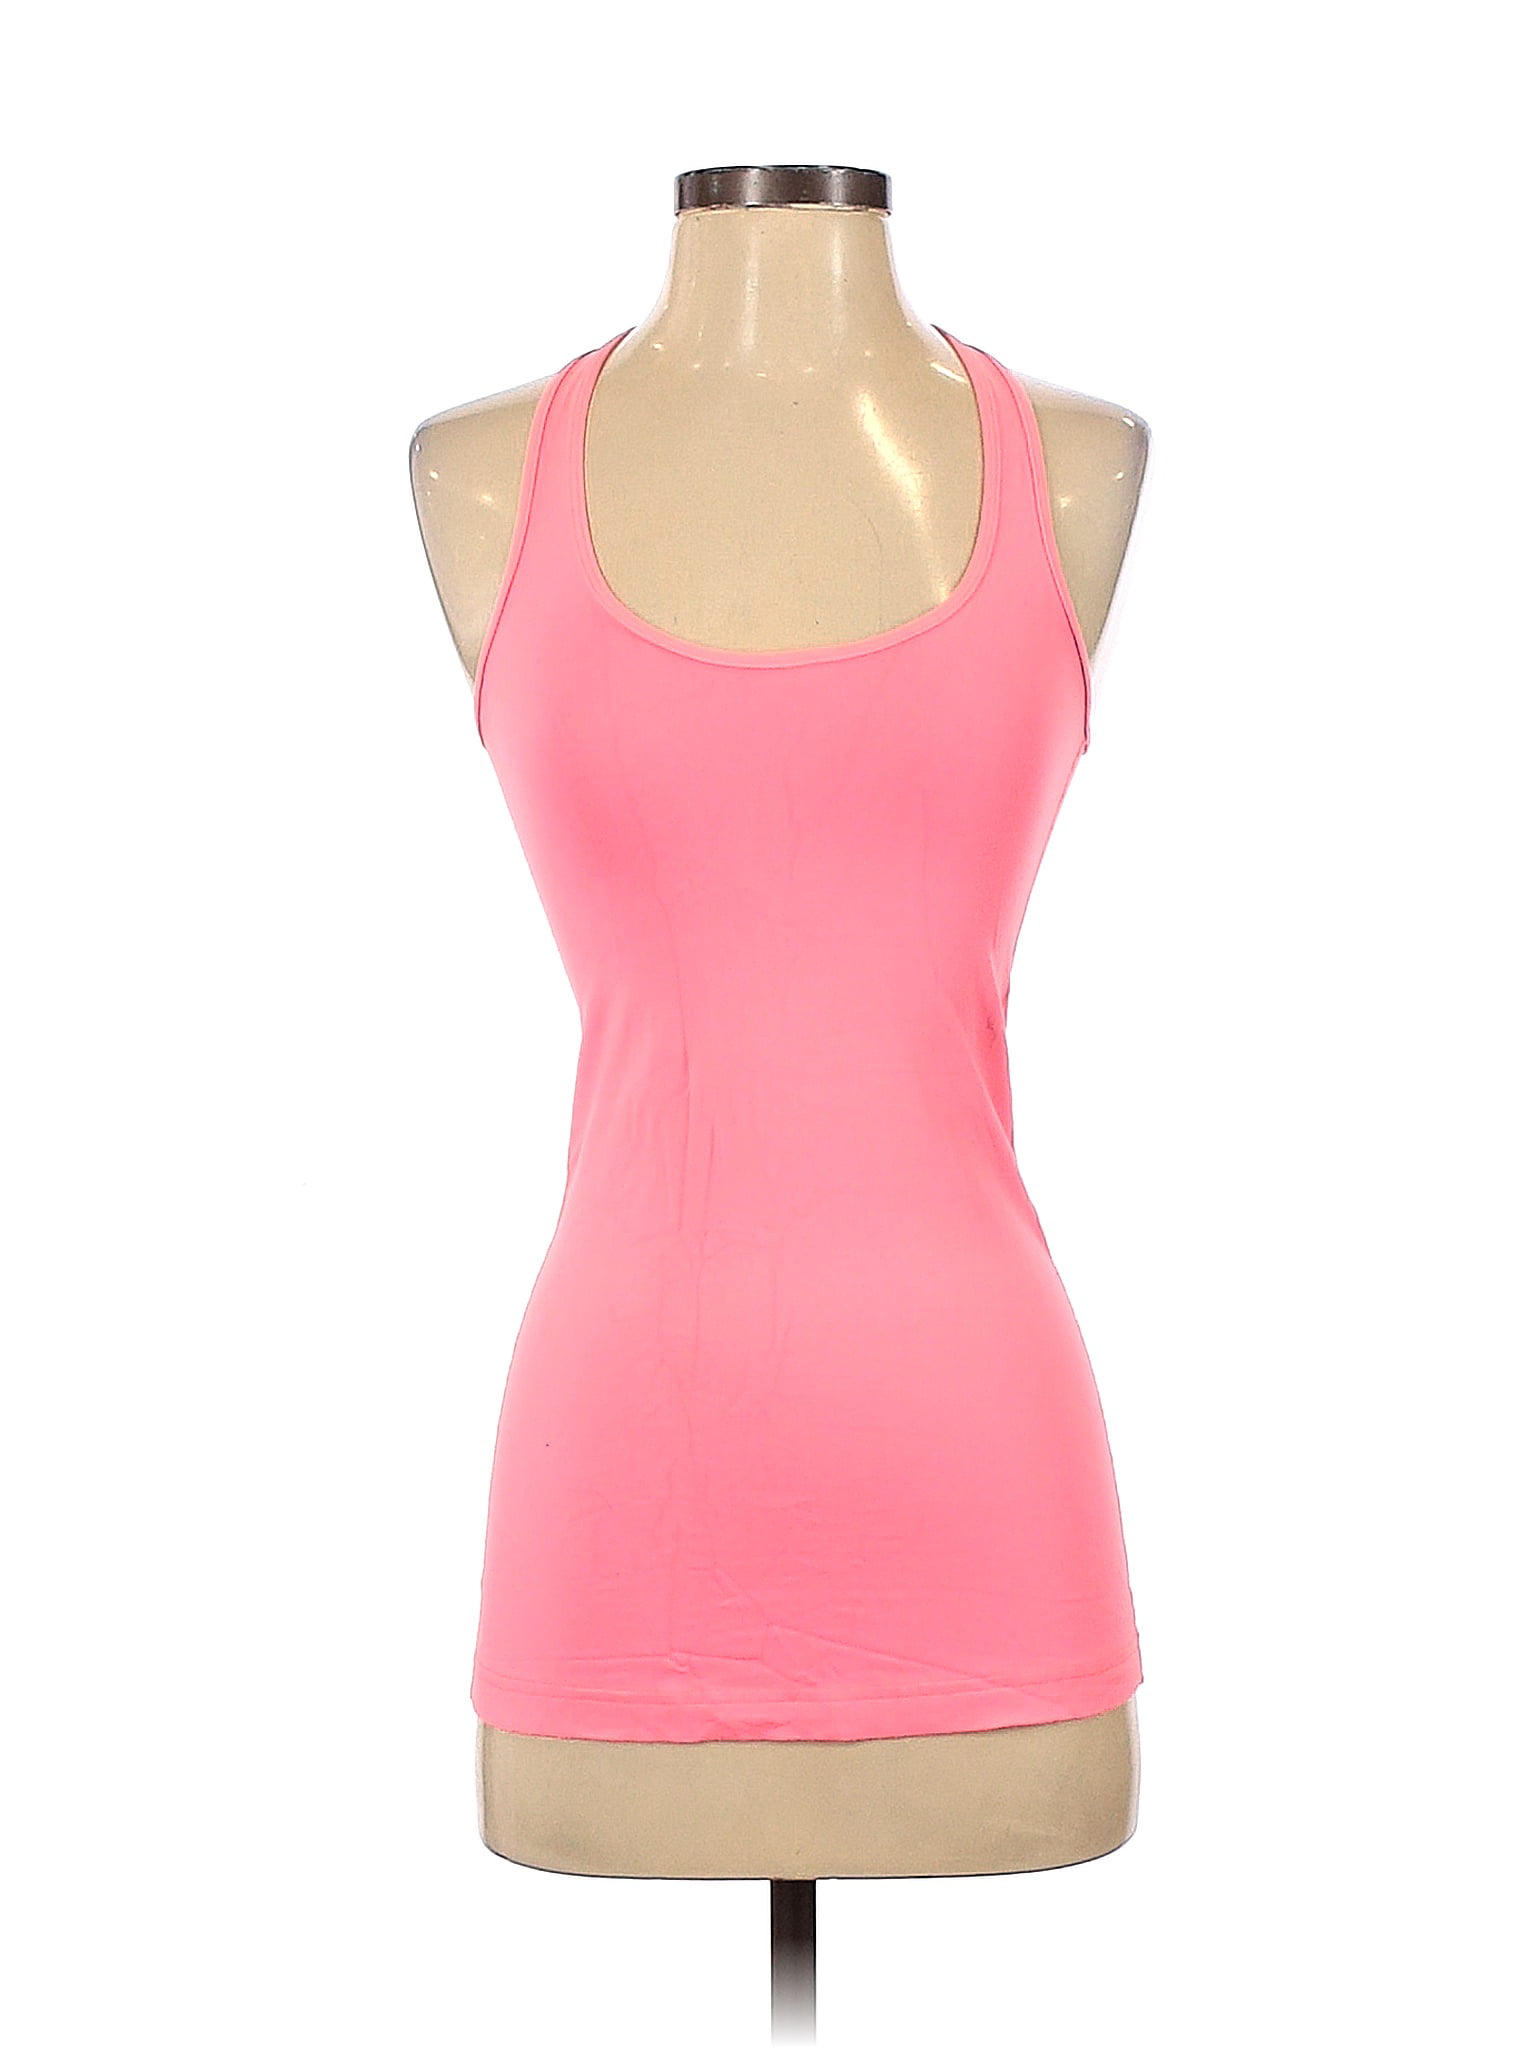 Pre-Owned Lululemon Athletica Womens Size 4 Active Palestine